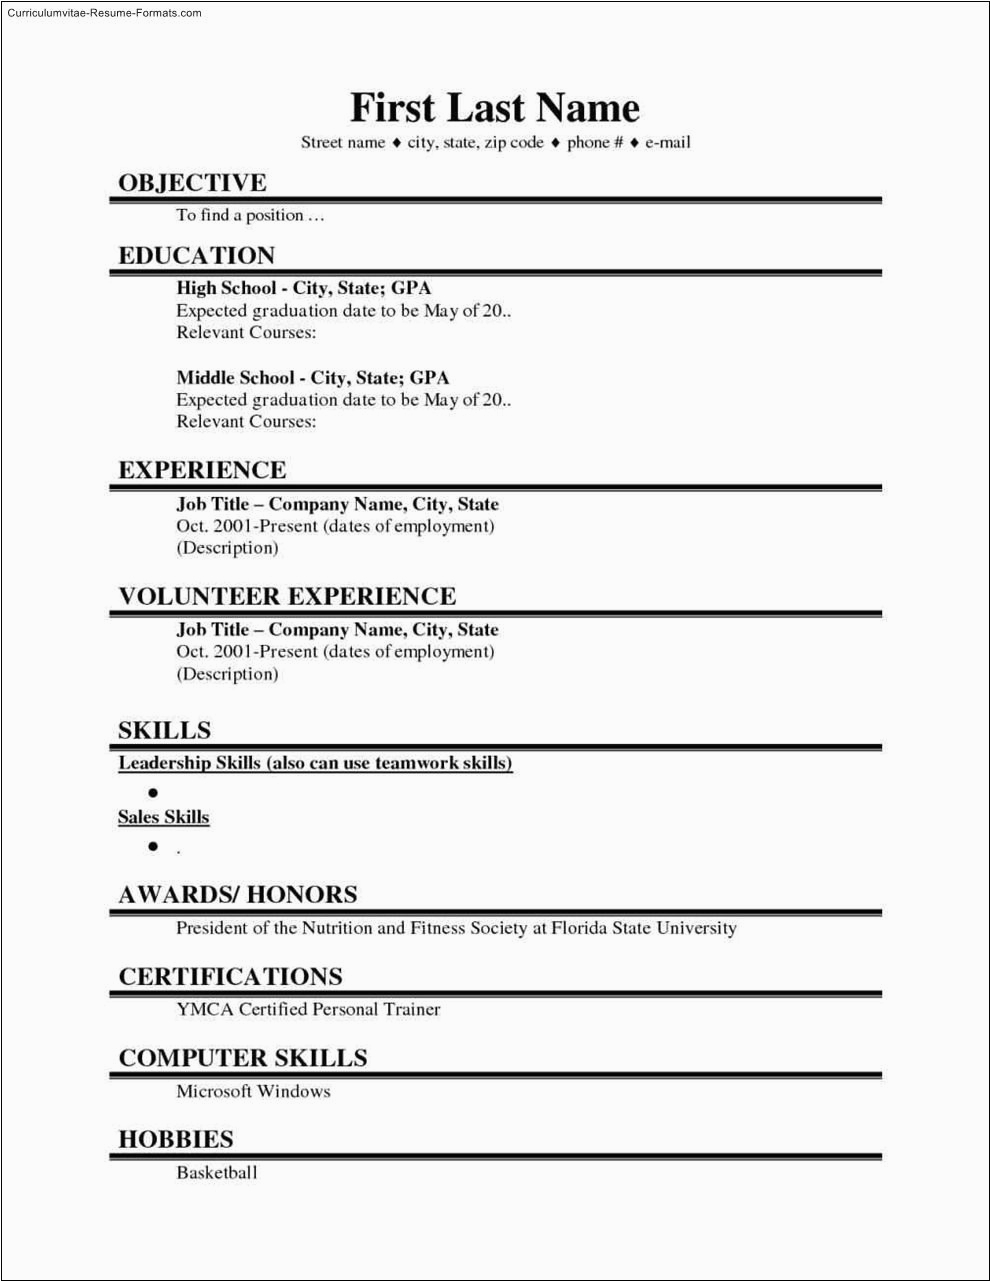 Resume Templates for College Students Free Students Resume College Student Resume Template